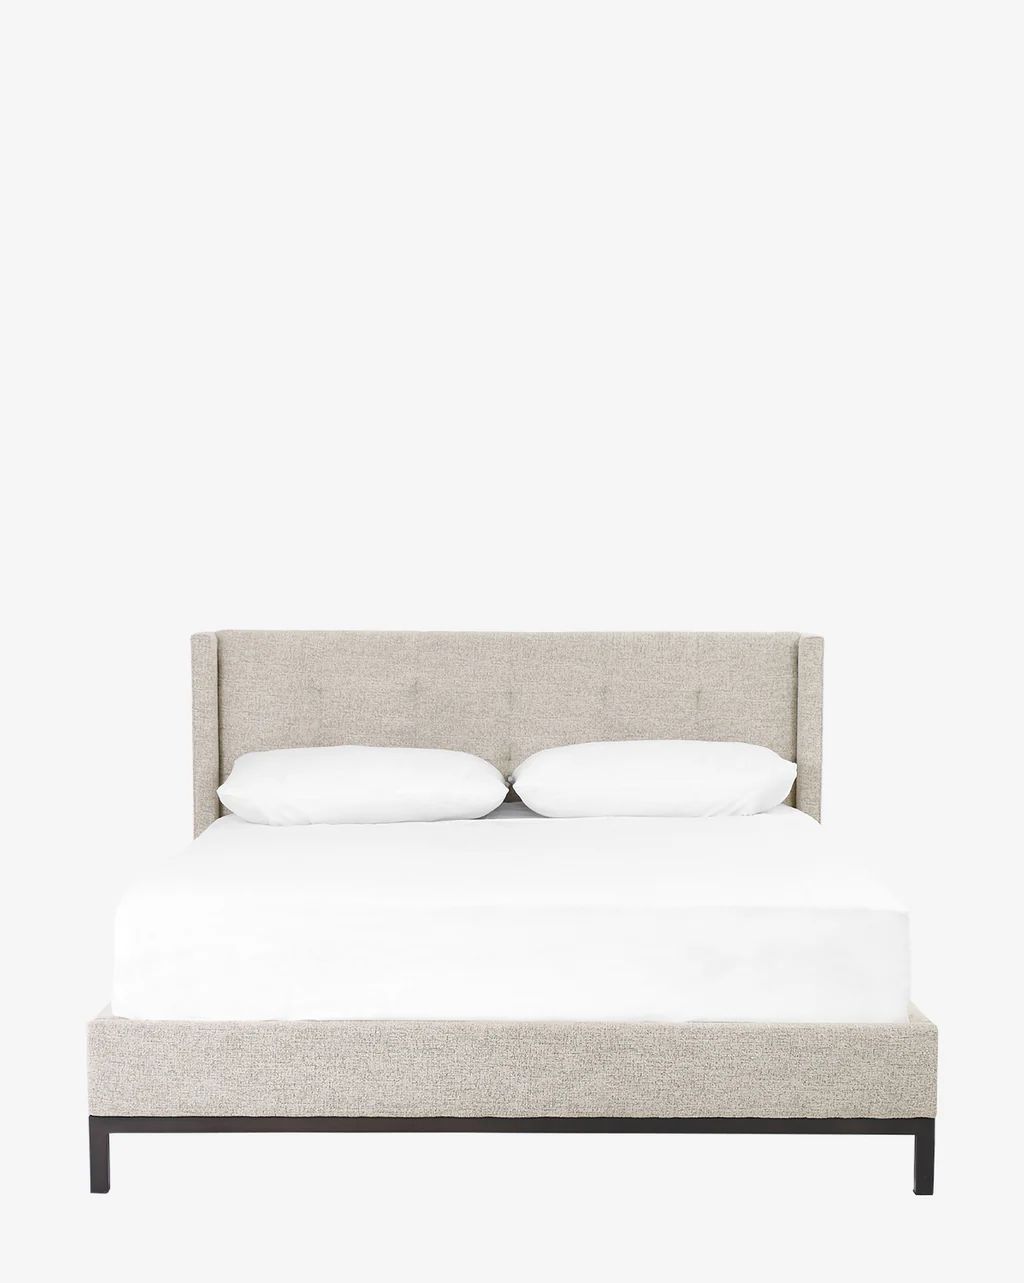 Nonnie Bed | McGee & Co.